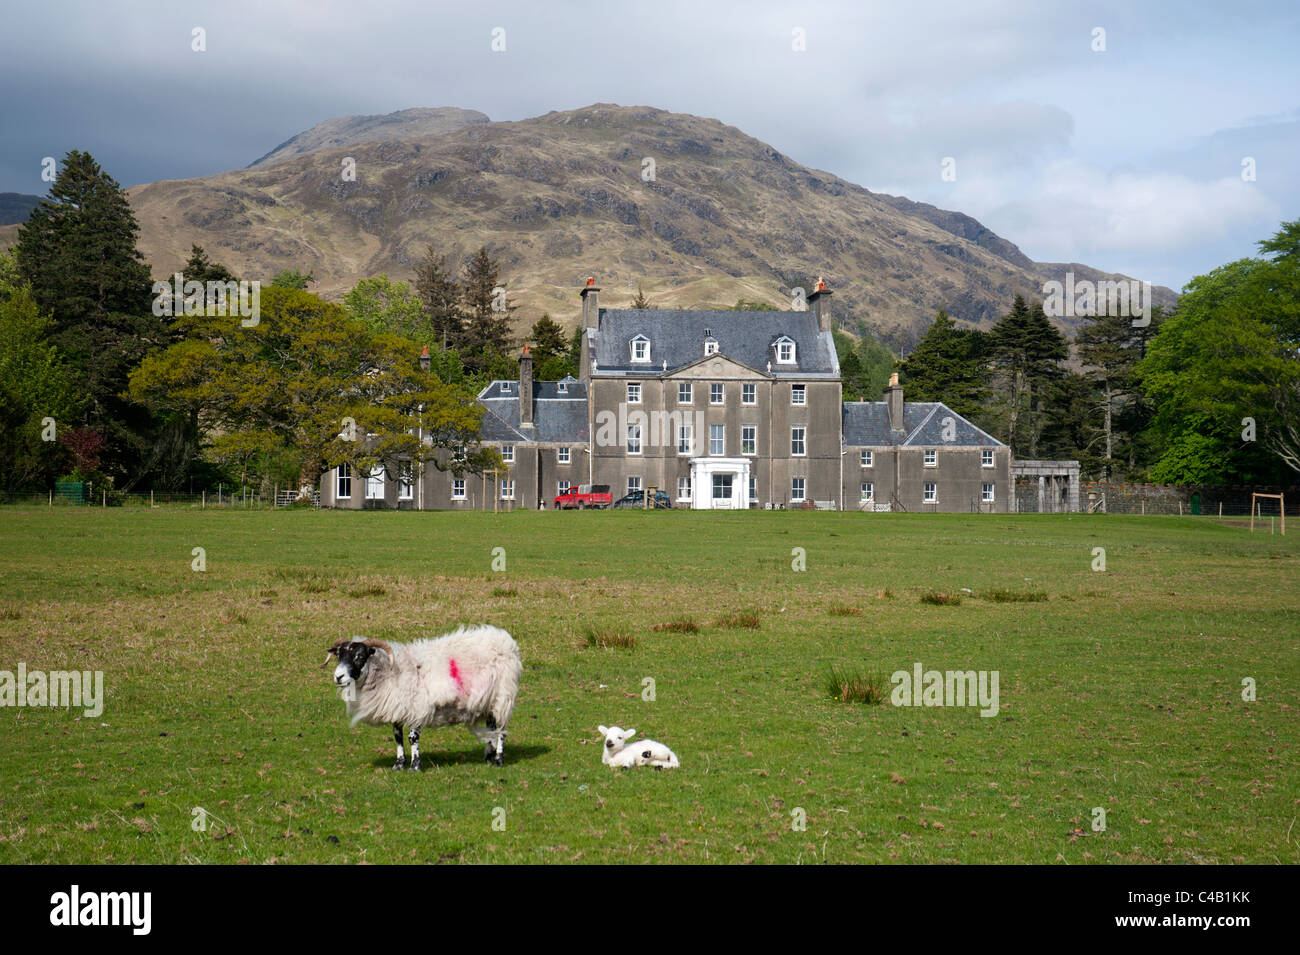 Sheep graze peacefully in front of Lochbuie House, on the west coast of the isle of Mull, Scotland.  SCO 7147 Stock Photo